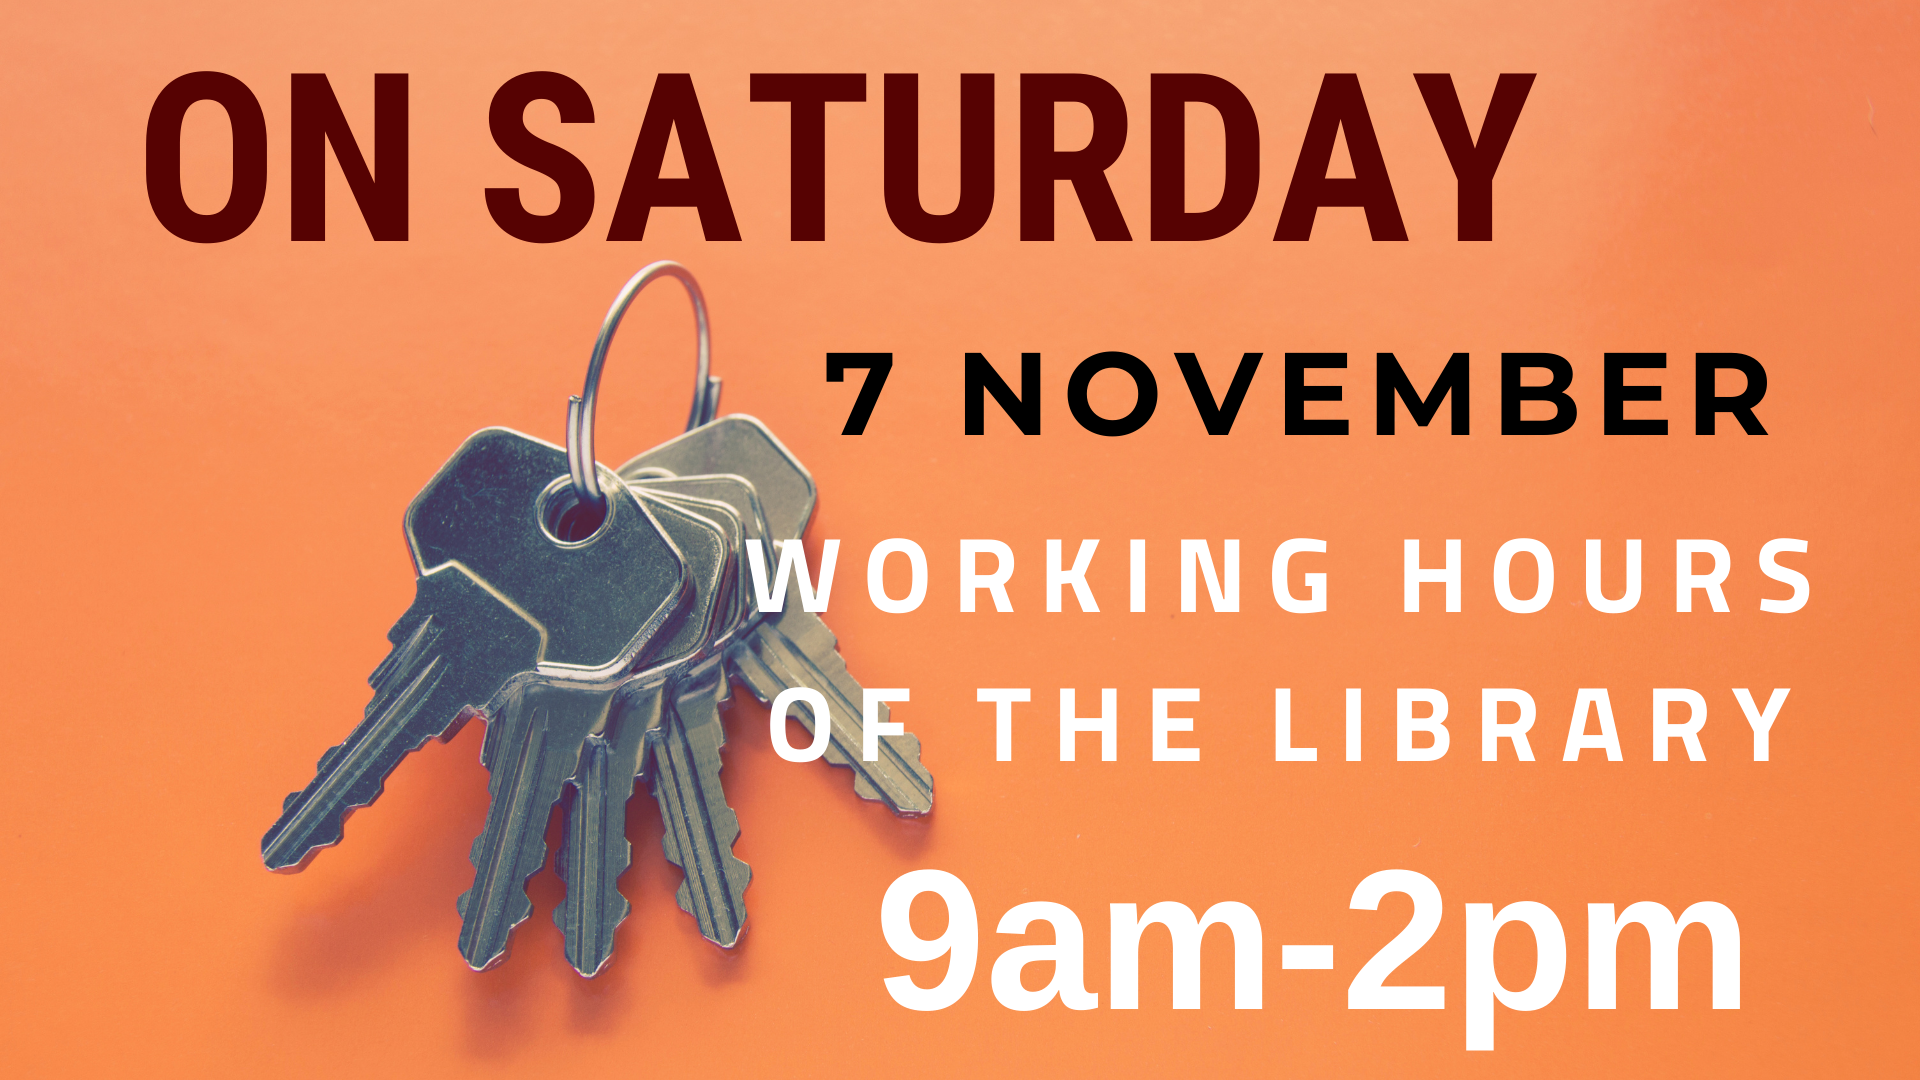 On Saturday 7 November our library is open from 9am until 2pm